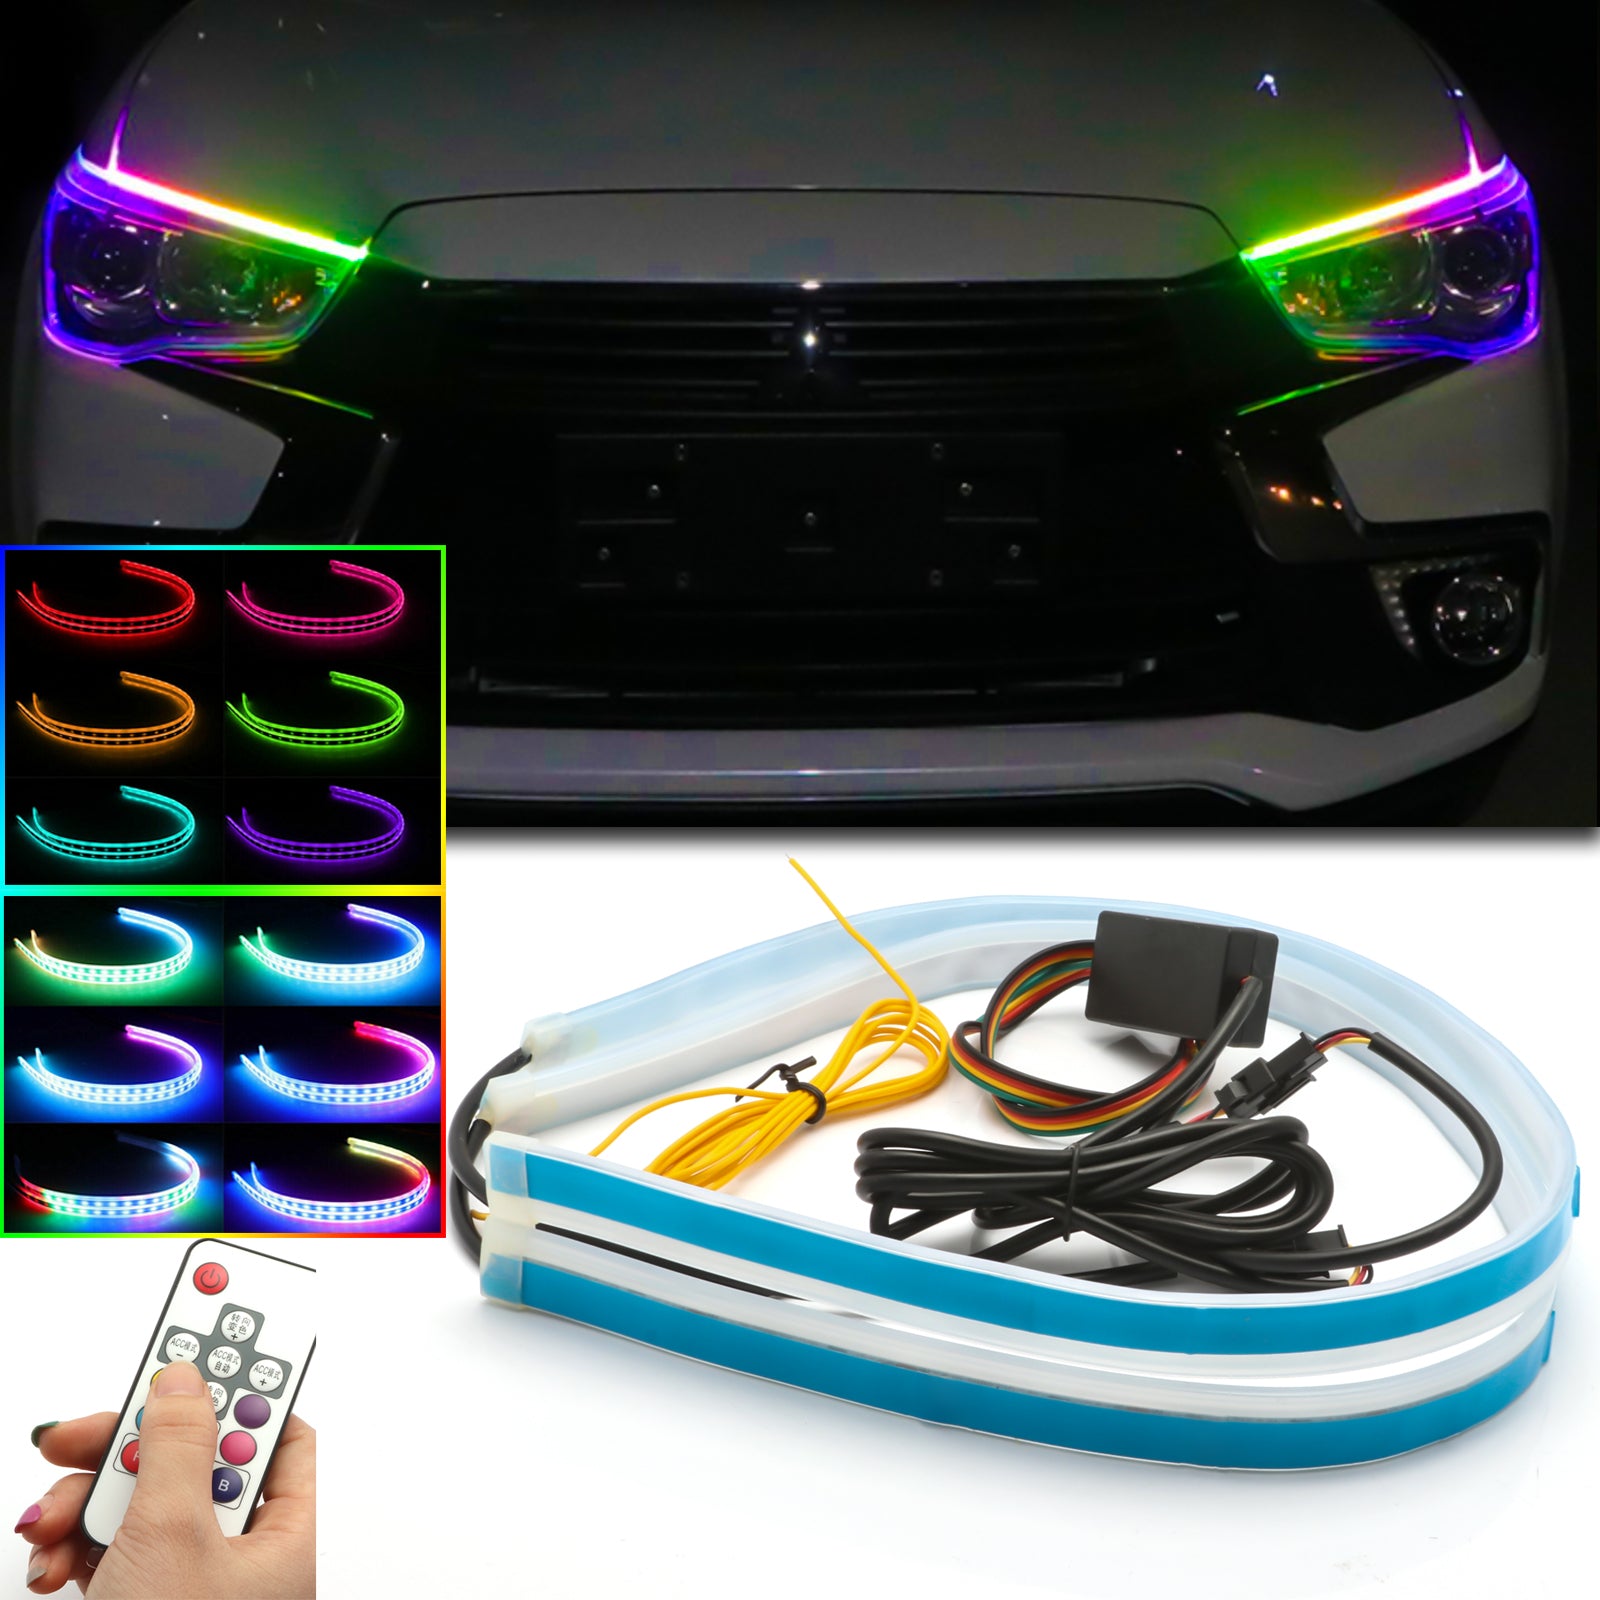 LEDCARE Car LED Turn Signal Lights, 24 Inches Dreamcolor Exterior Headlight  Led Strip with APP & Remote Control, Flexible Waterproof Daytime Running